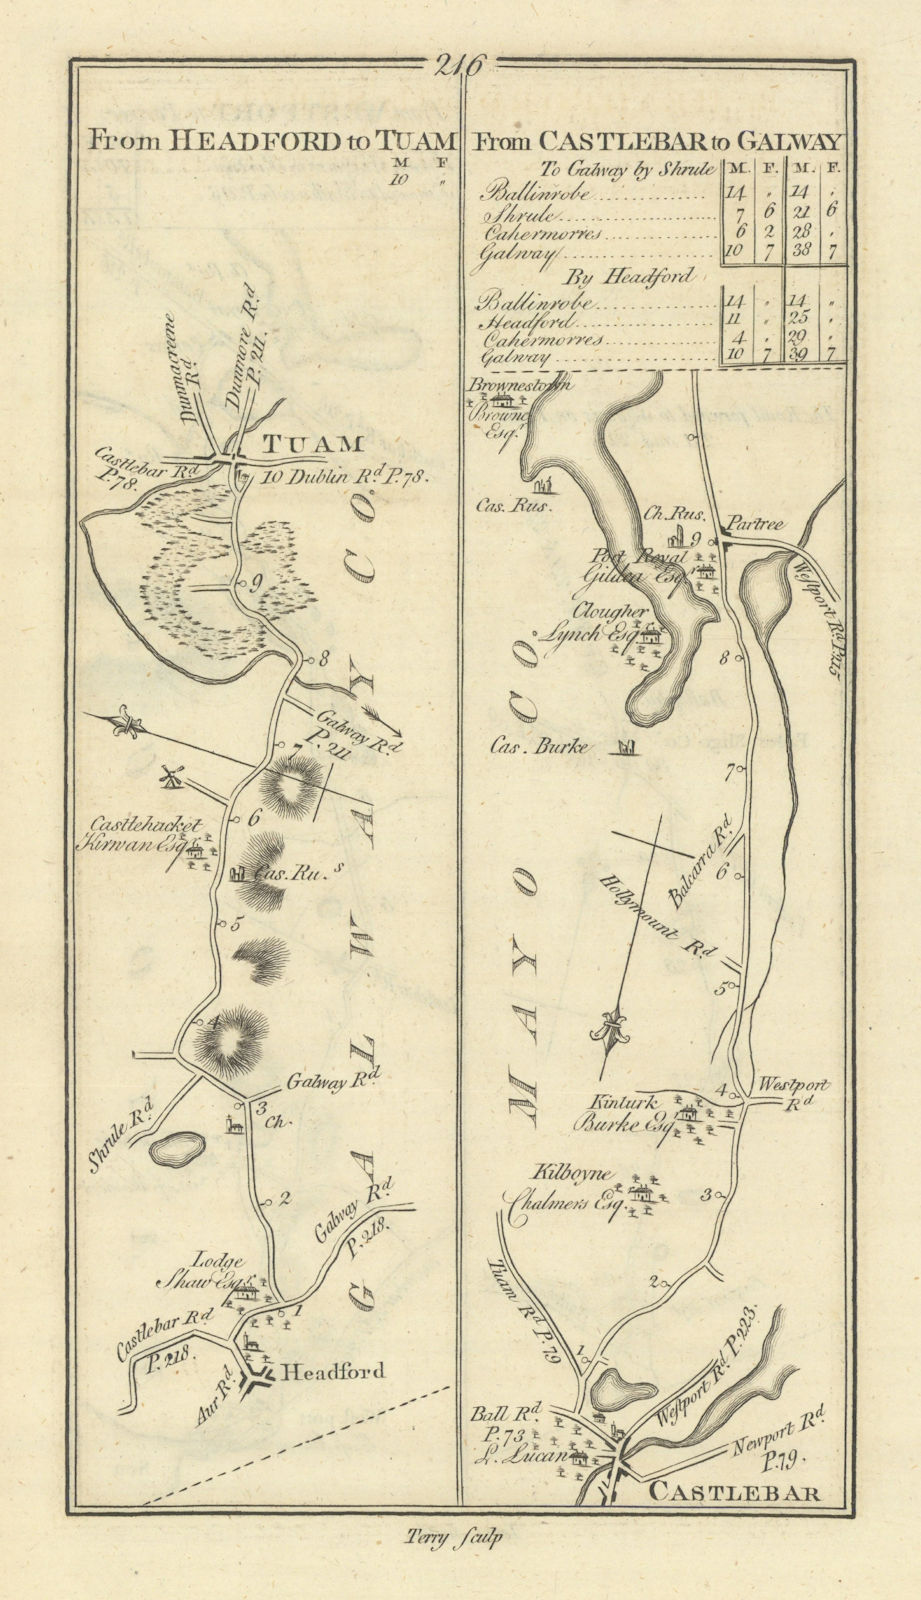 Associate Product #216 Headford to Tuam. Castlebar to Galway. Partry Mayo. TAYLOR/SKINNER 1778 map